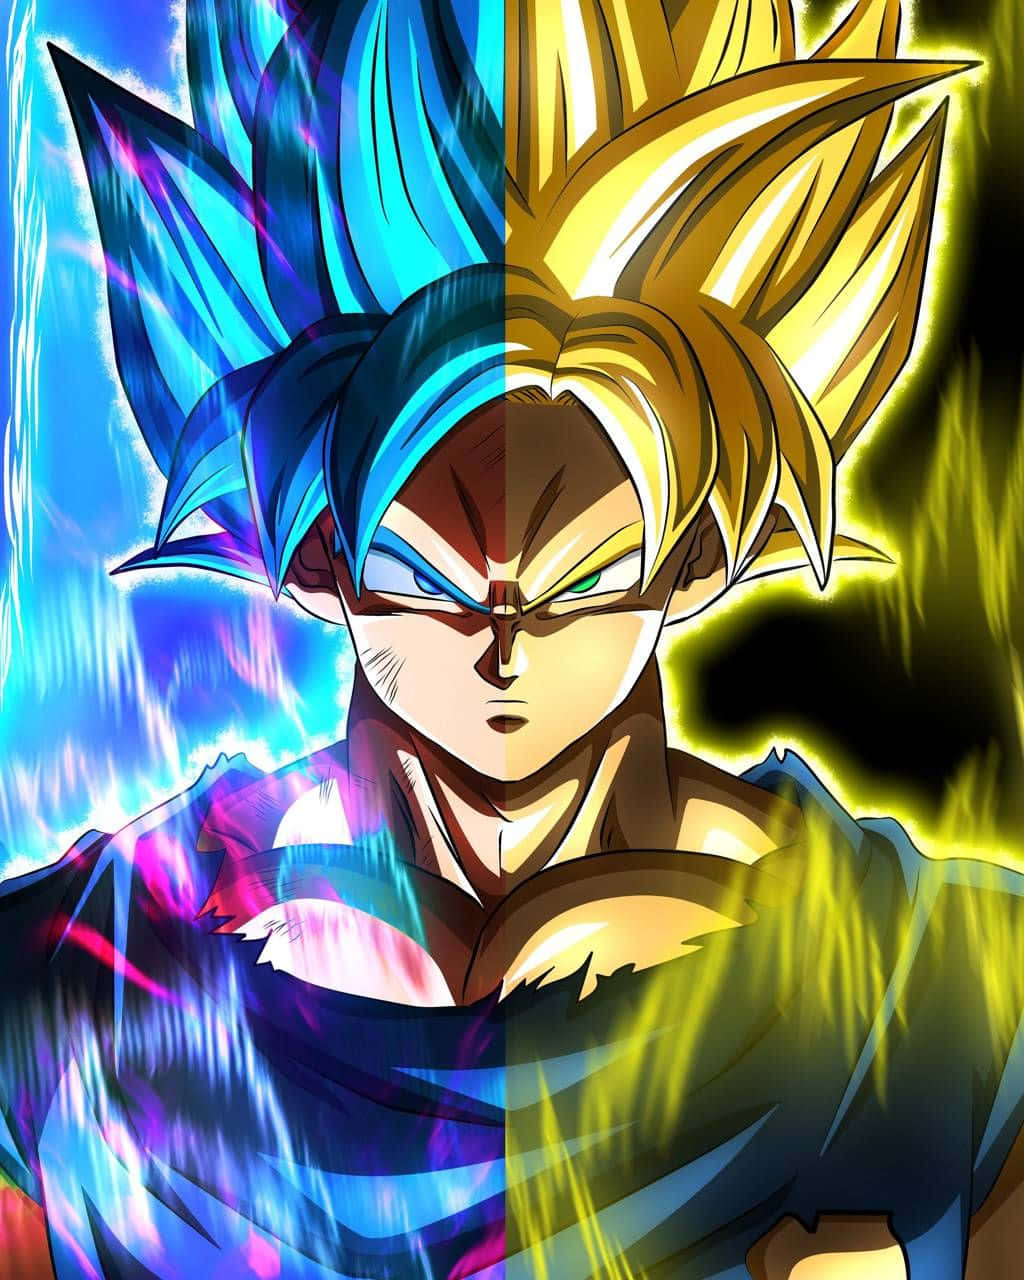 Follow The Adventure to Unlock the Power Within - Goku and Gohan from Dragon Ball